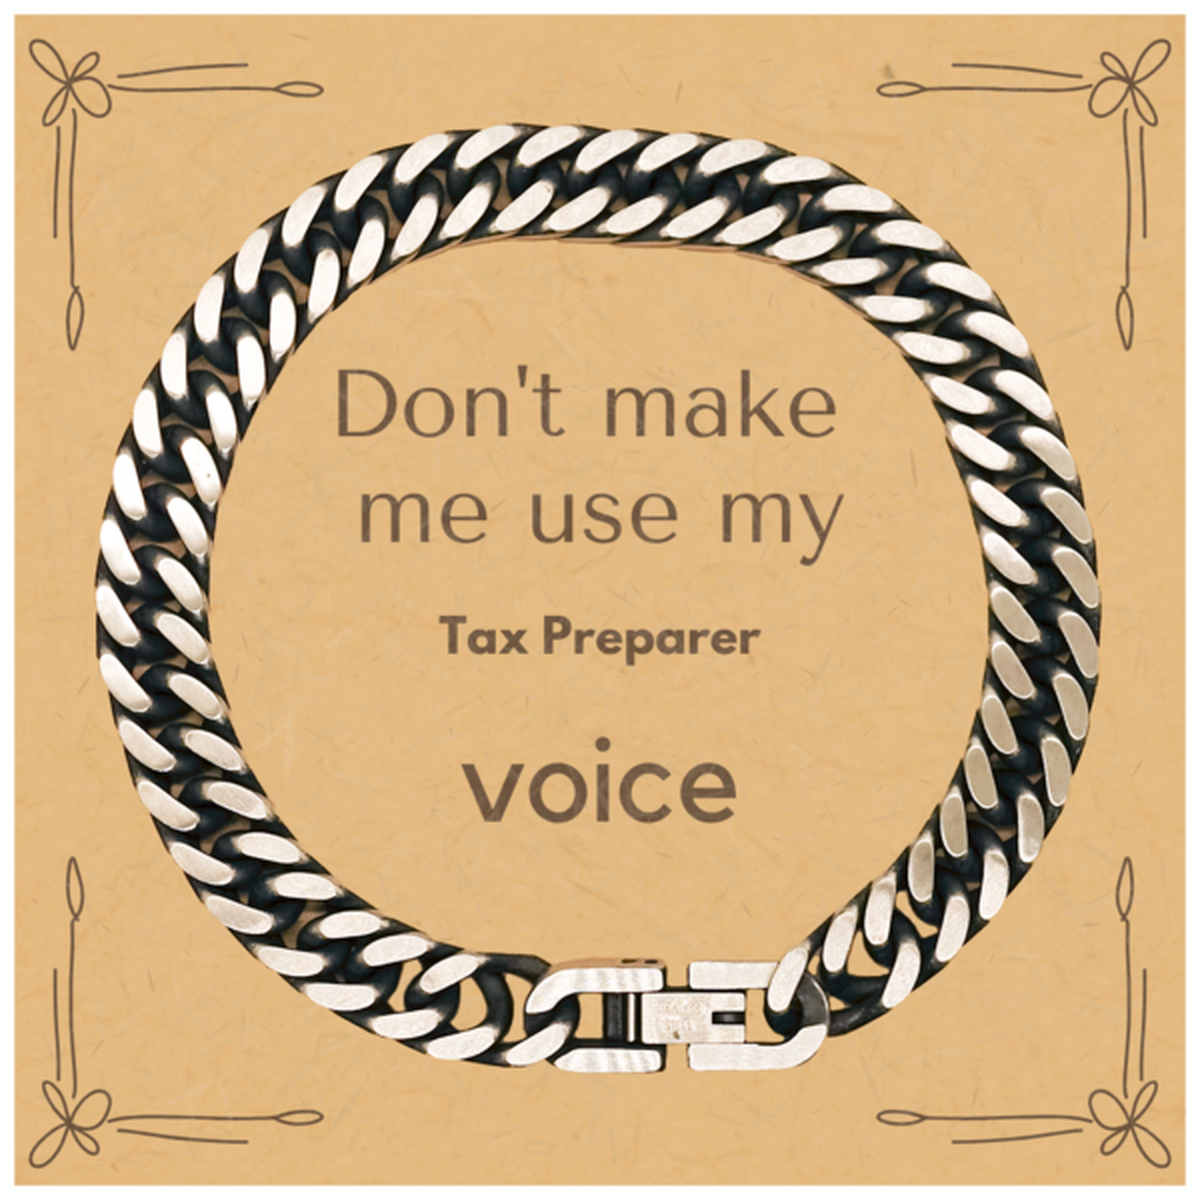 Don't make me use my Tax Preparer voice, Sarcasm Tax Preparer Card Gifts, Christmas Tax Preparer Cuban Link Chain Bracelet Birthday Unique Gifts For Tax Preparer Coworkers, Men, Women, Colleague, Friends